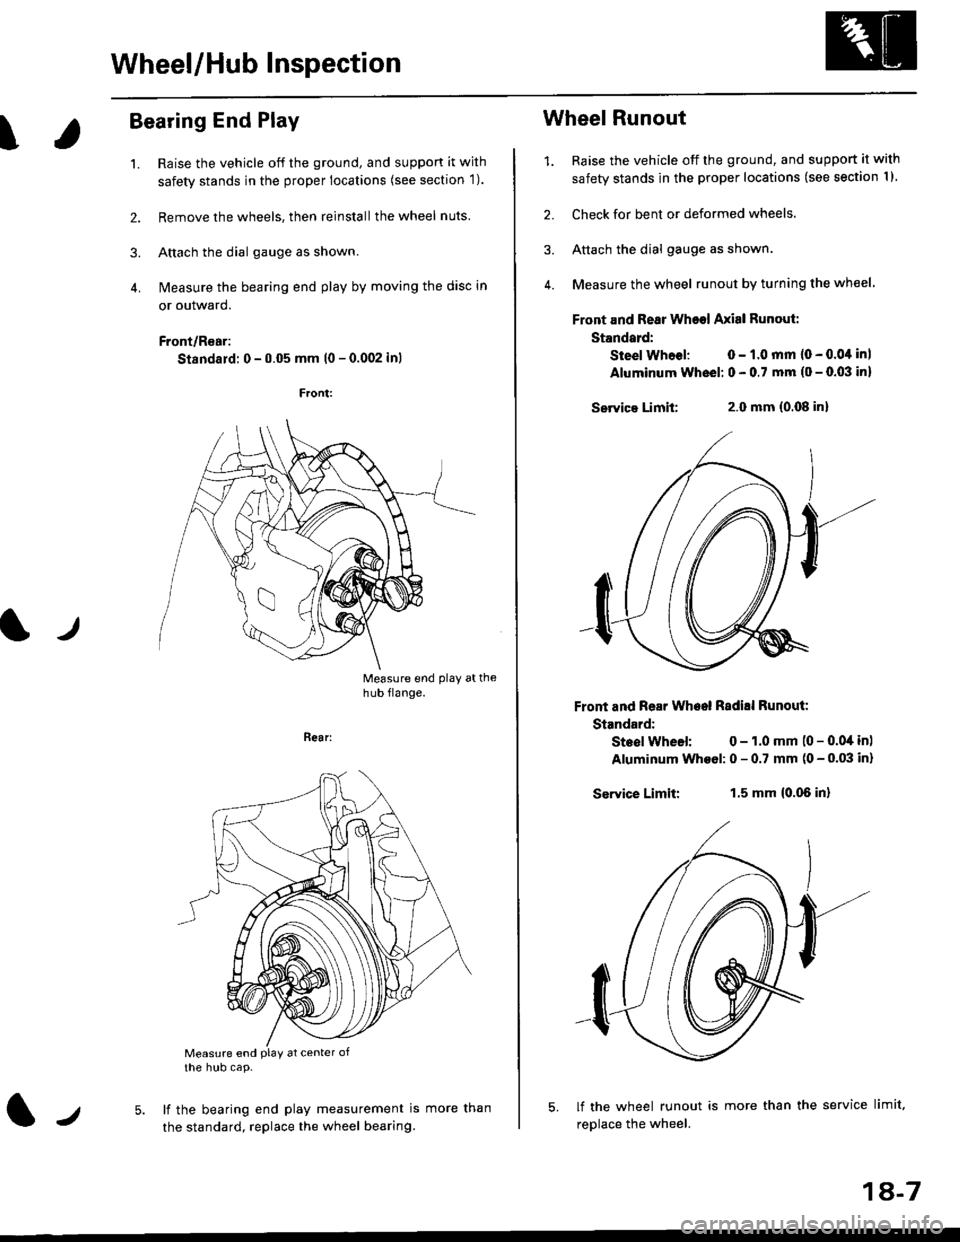 HONDA CIVIC 1998 6.G Workshop Manual Wheel/Hub Inspection
\
Bearing End Play
1. Raise the vehicle off the ground, and suppon it wjth
safety stands in the proper locations (see section 1).
2. Remove the wheels, then reinstallthe wheel nut